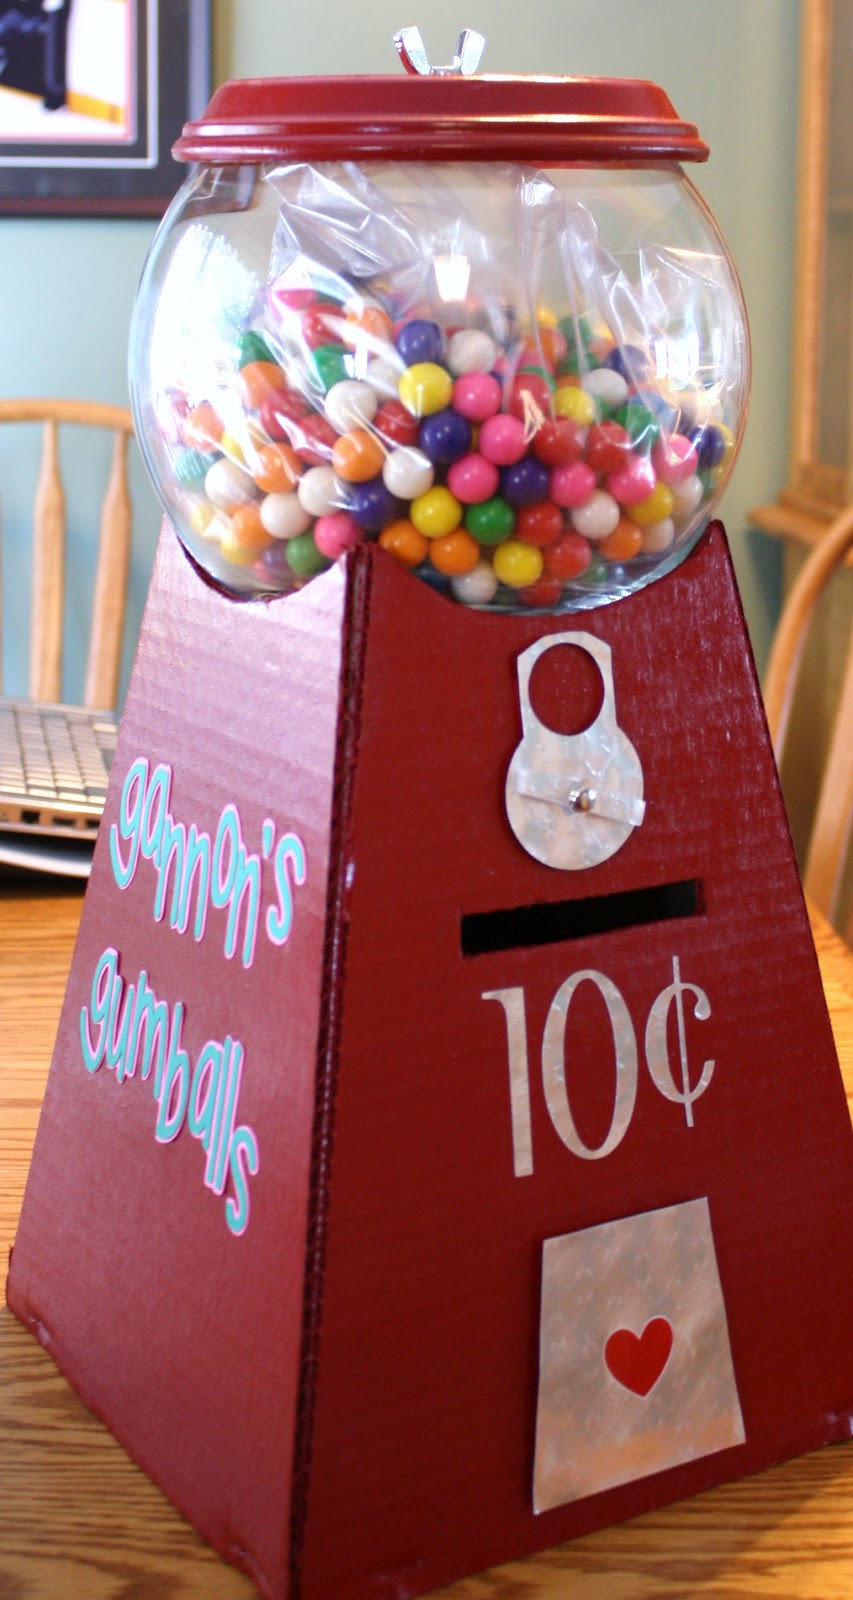 Valentines Day Boxes Ideas
 Adorable Valentine s Day Box Ideas little blonde mom